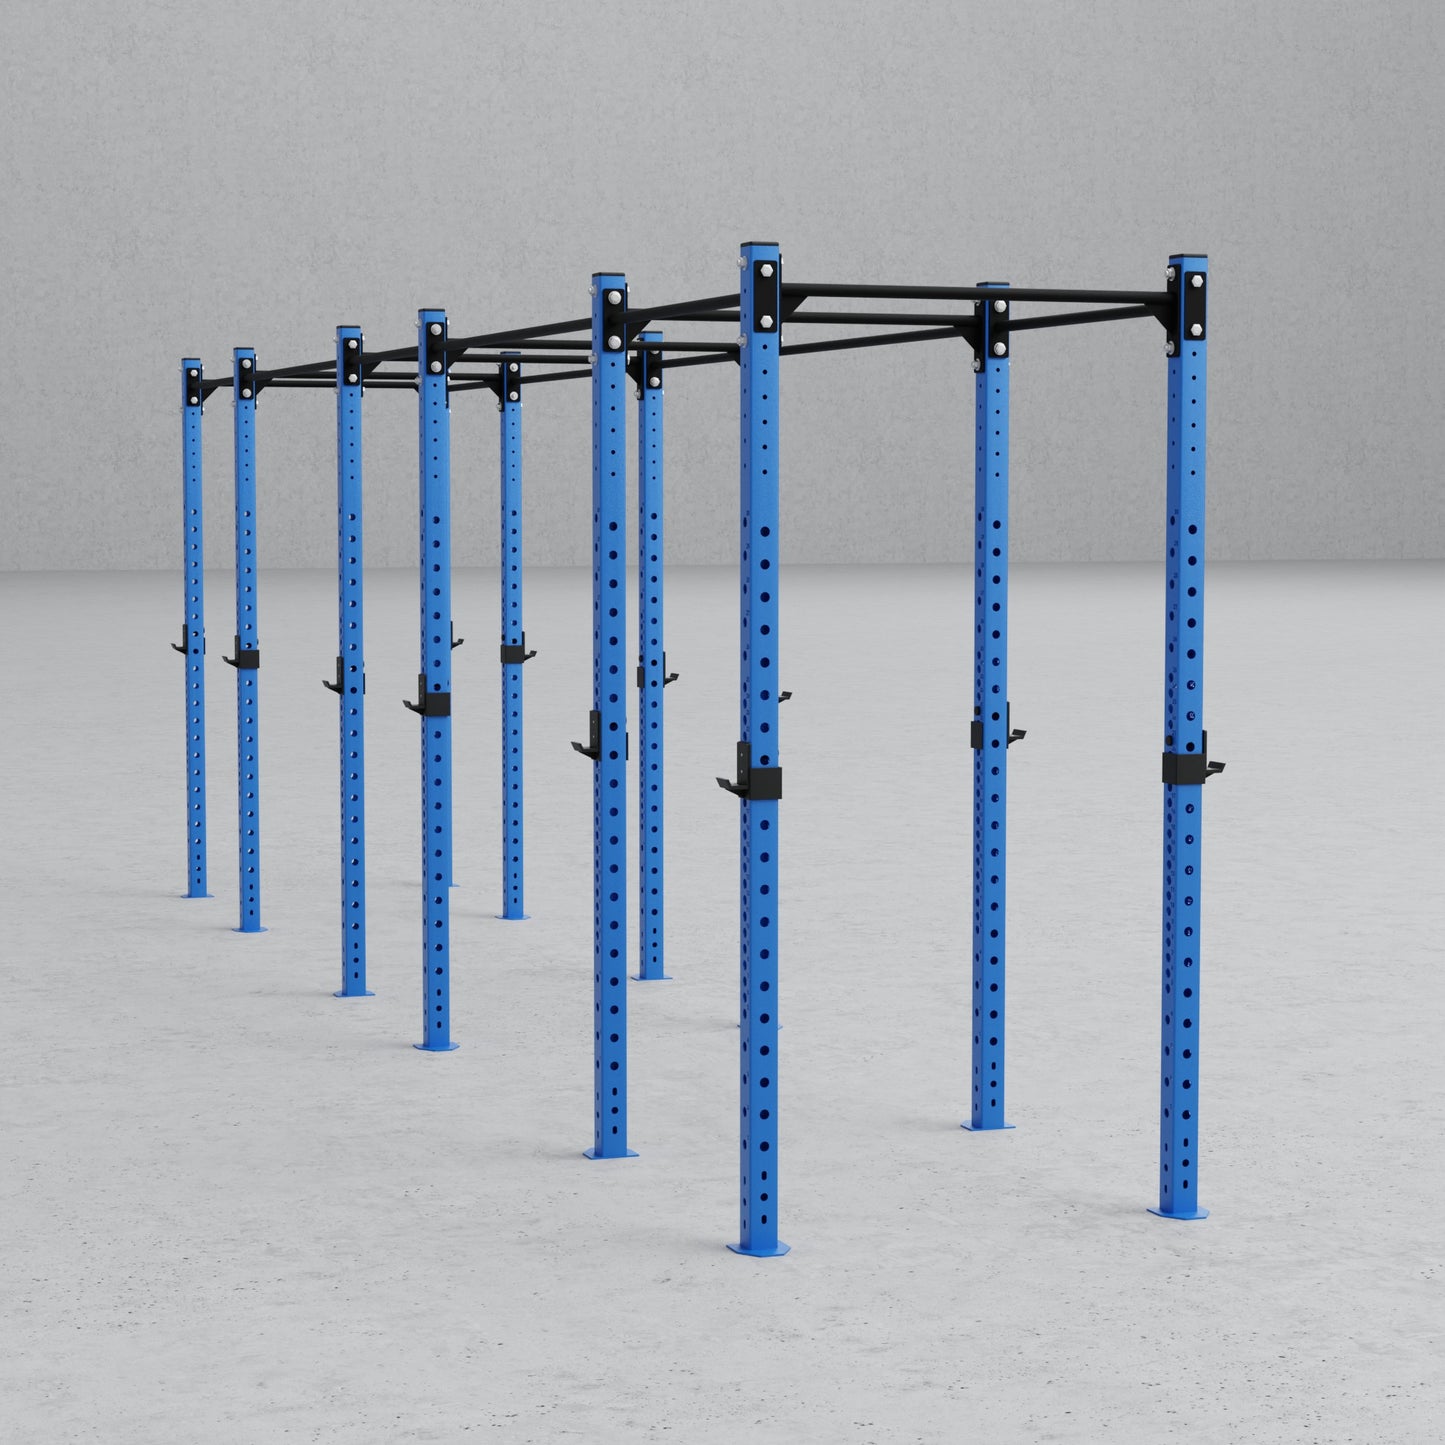 Free Standing Gym Rigs